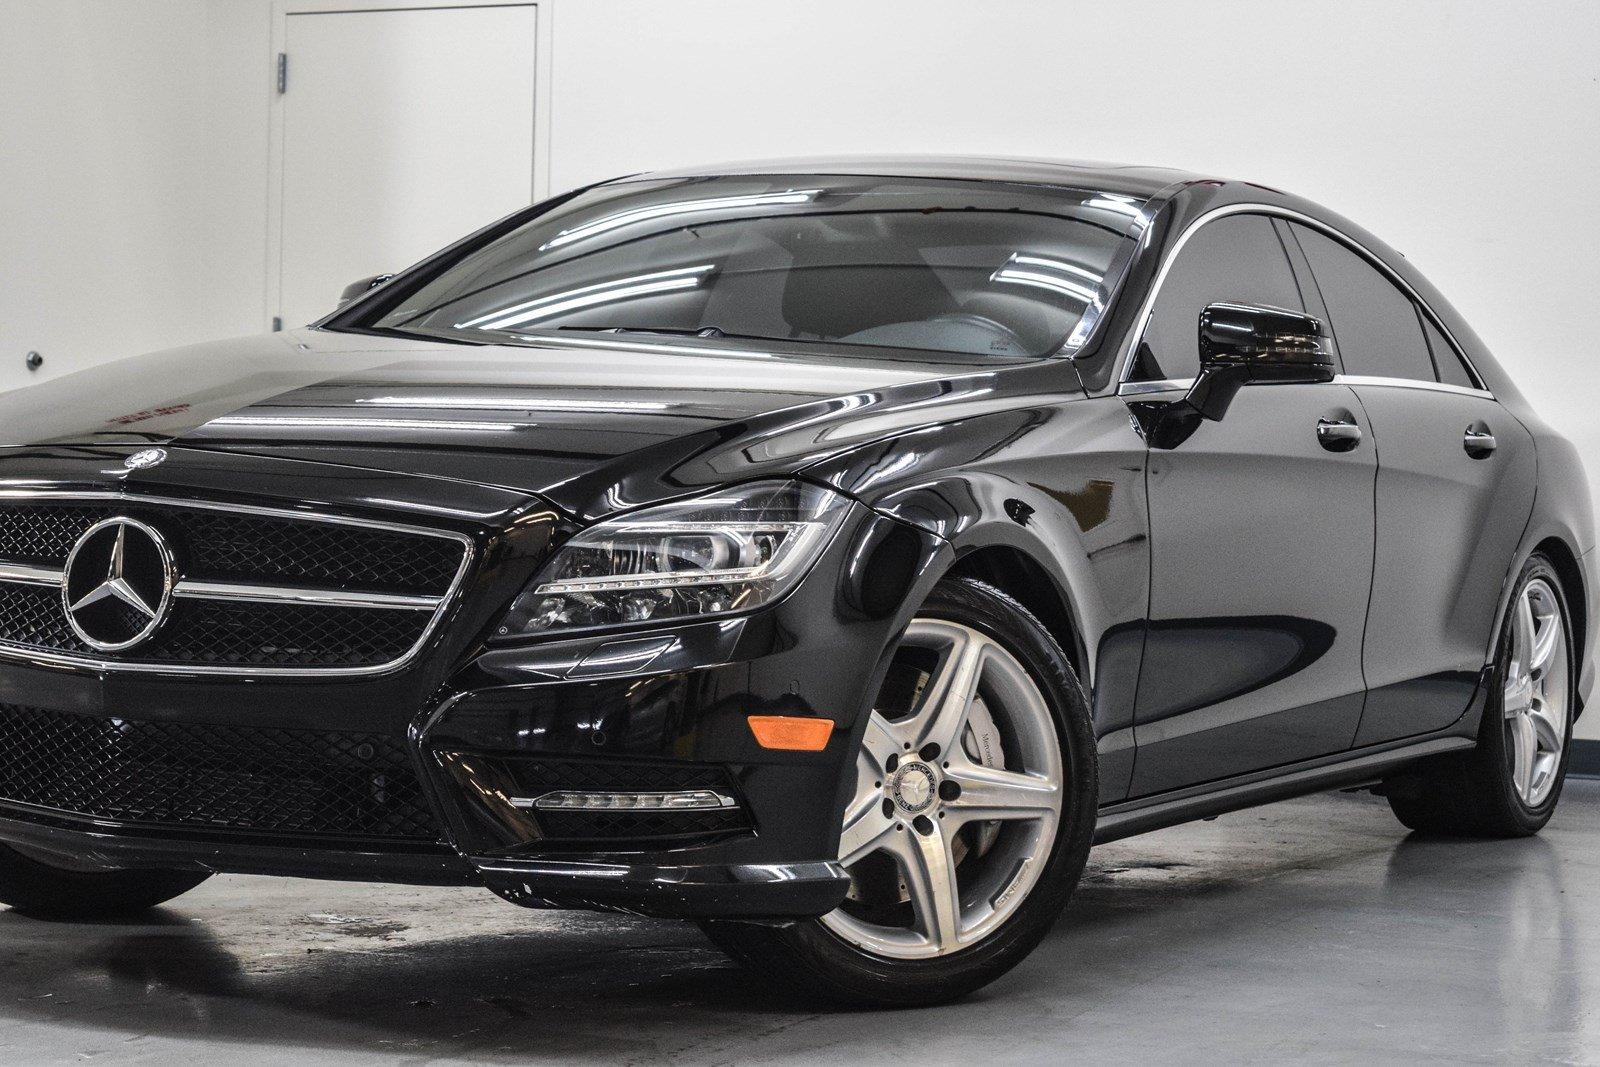 Used 2013 Mercedes-Benz CLS-Class CLS550 for sale Sold at Gravity Autos Marietta in Marietta GA 30060 34